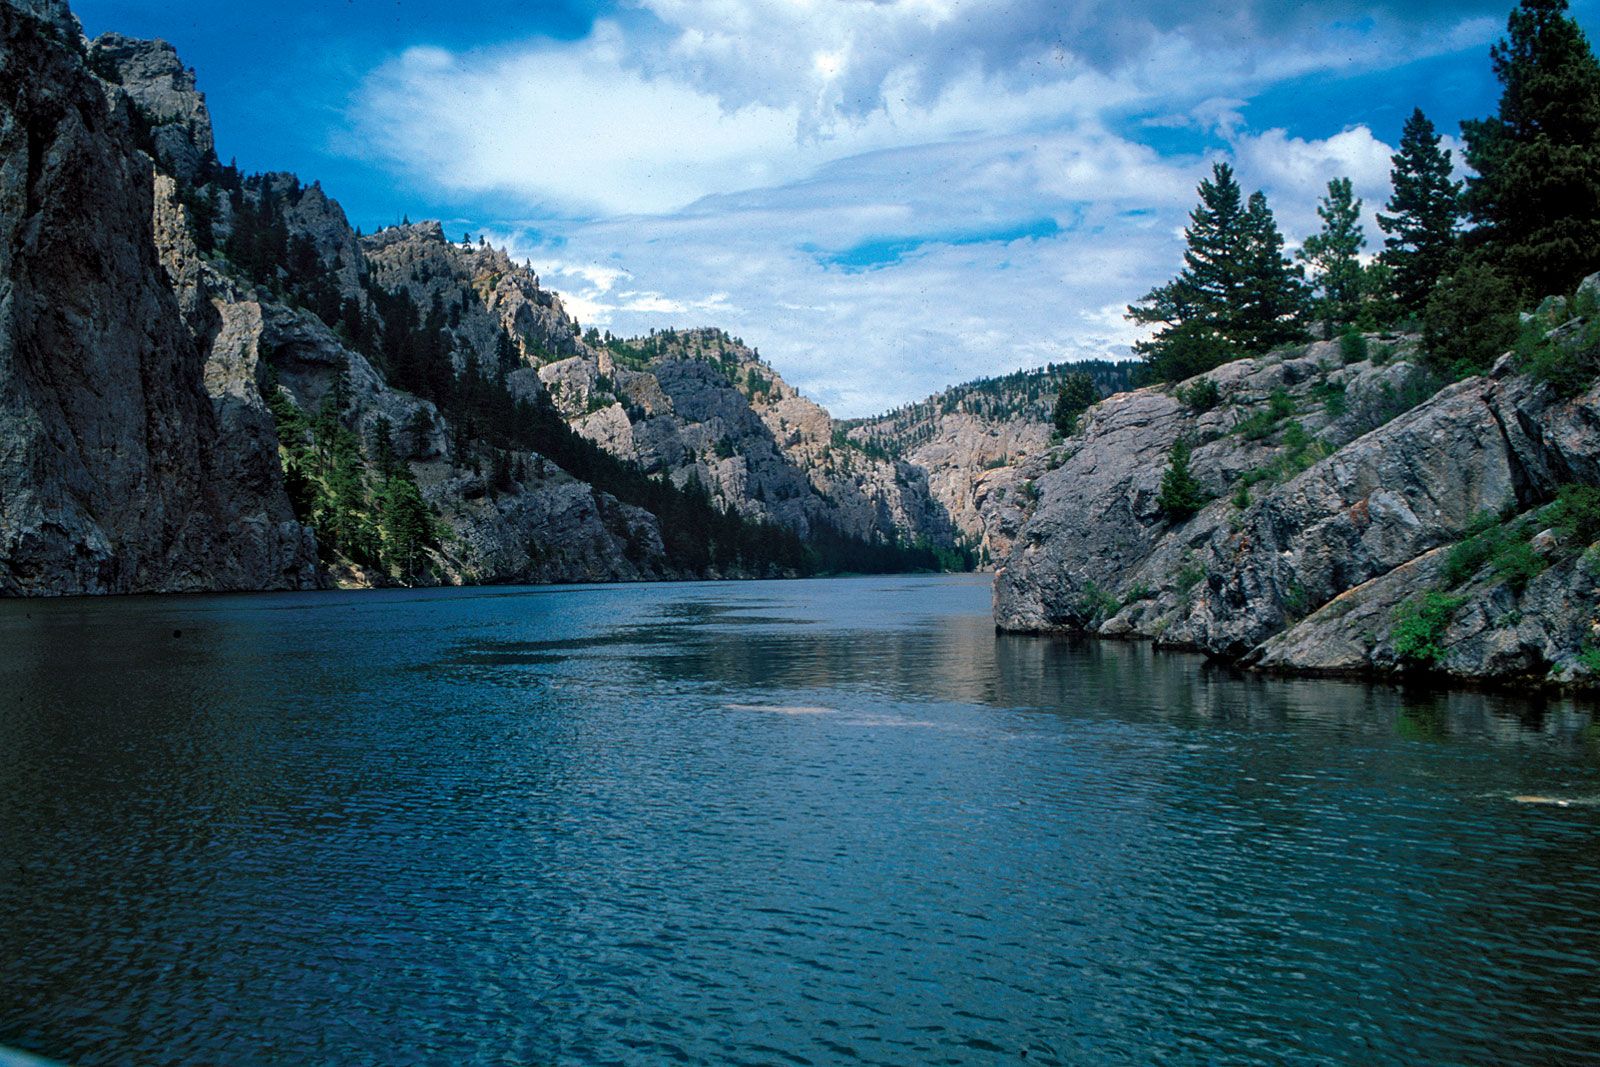 The Missouri River is the Longest River in North America